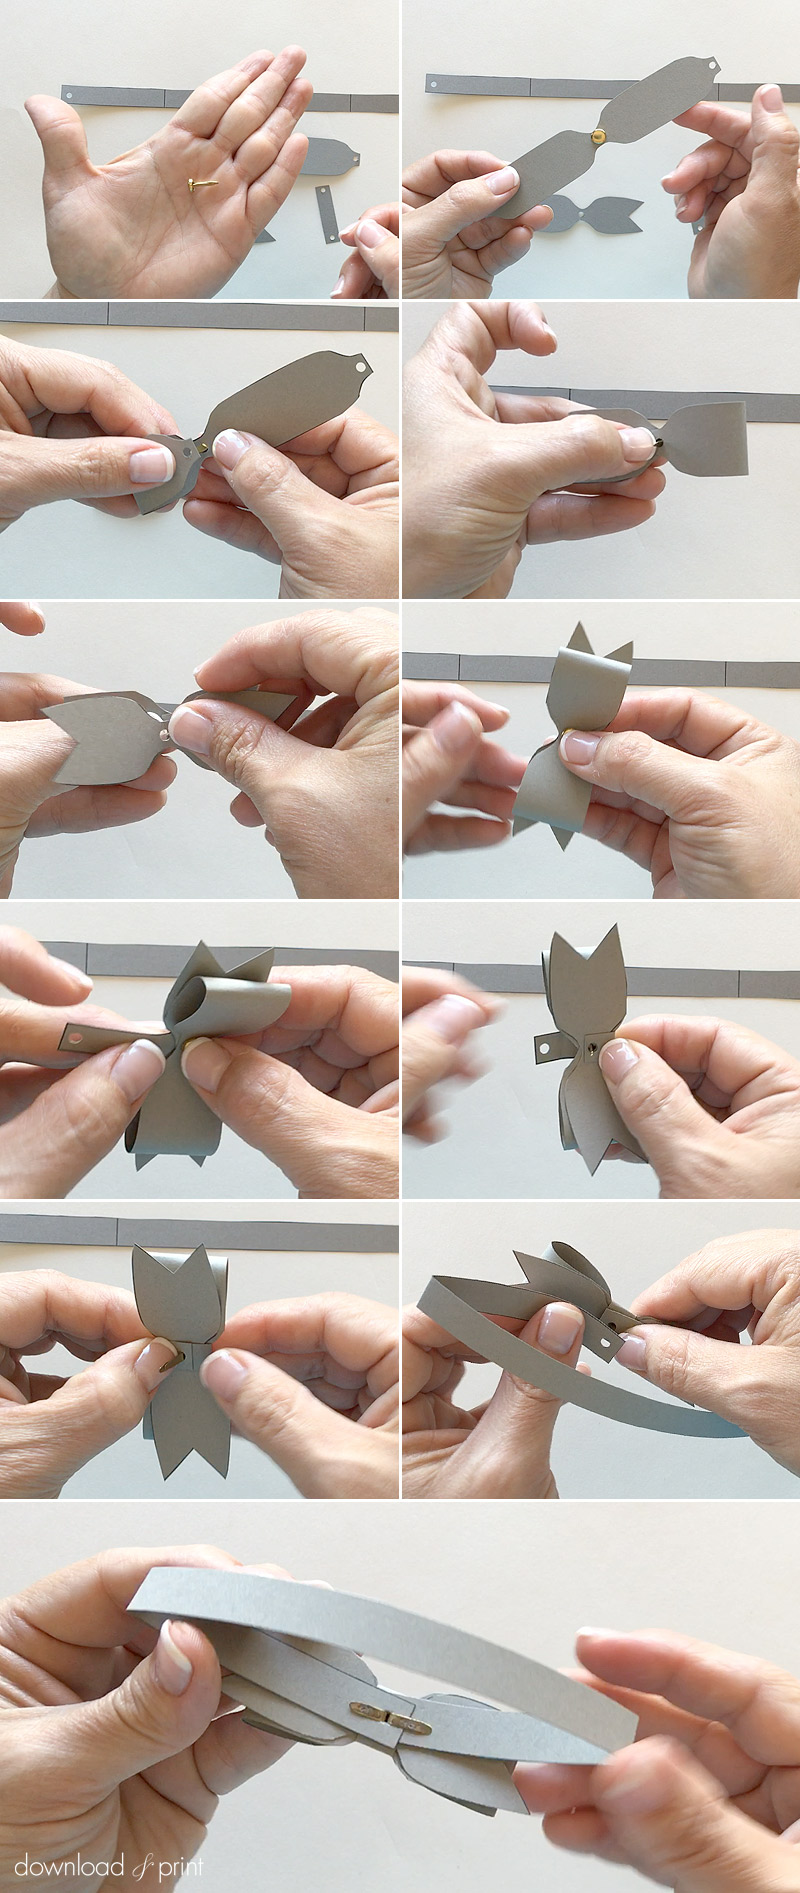 Asemble DIY bow tie belly band | Download & Print